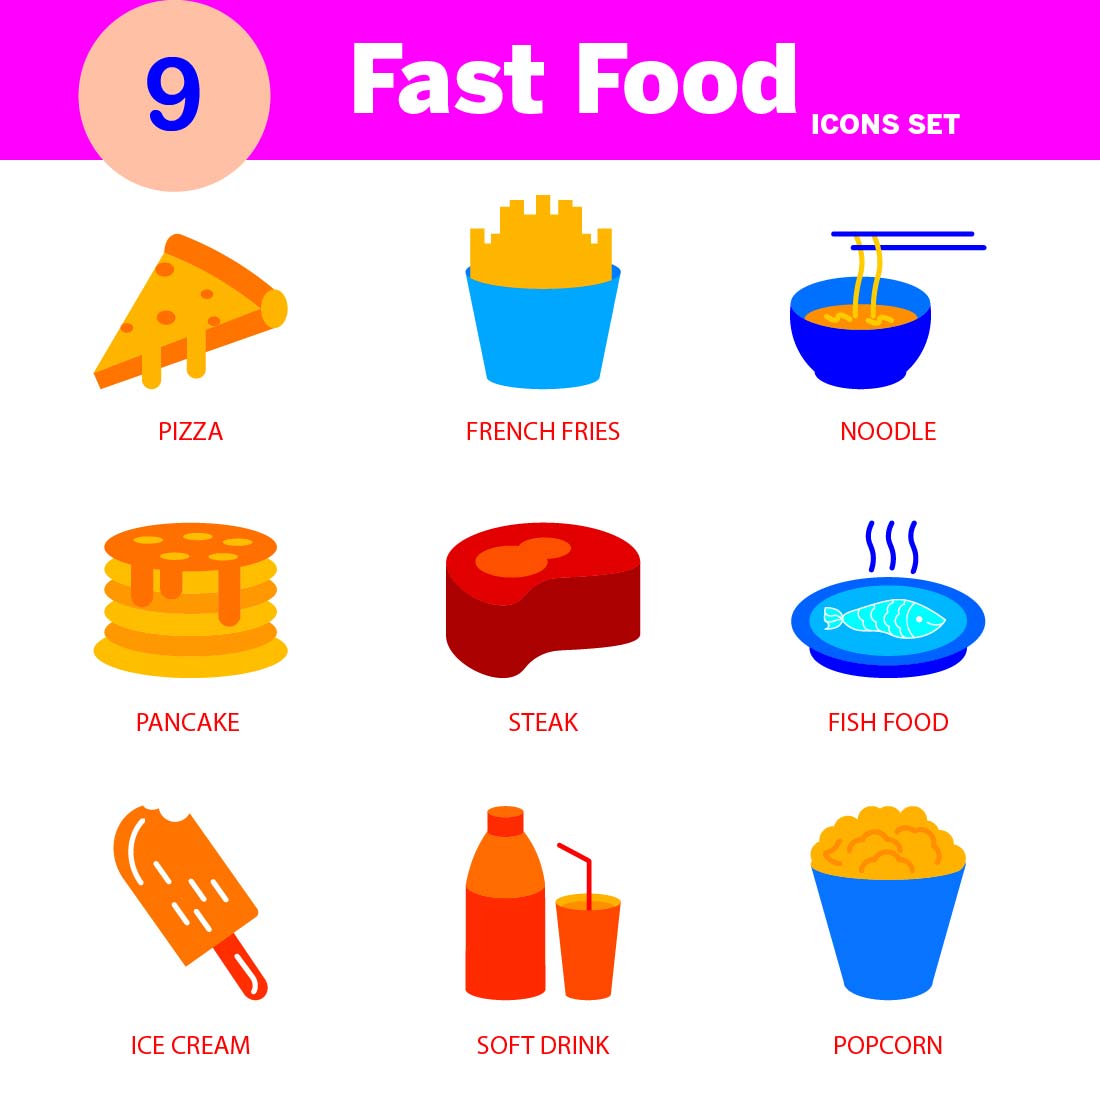 Modern Fast Food icon set editable and resizable cover image.